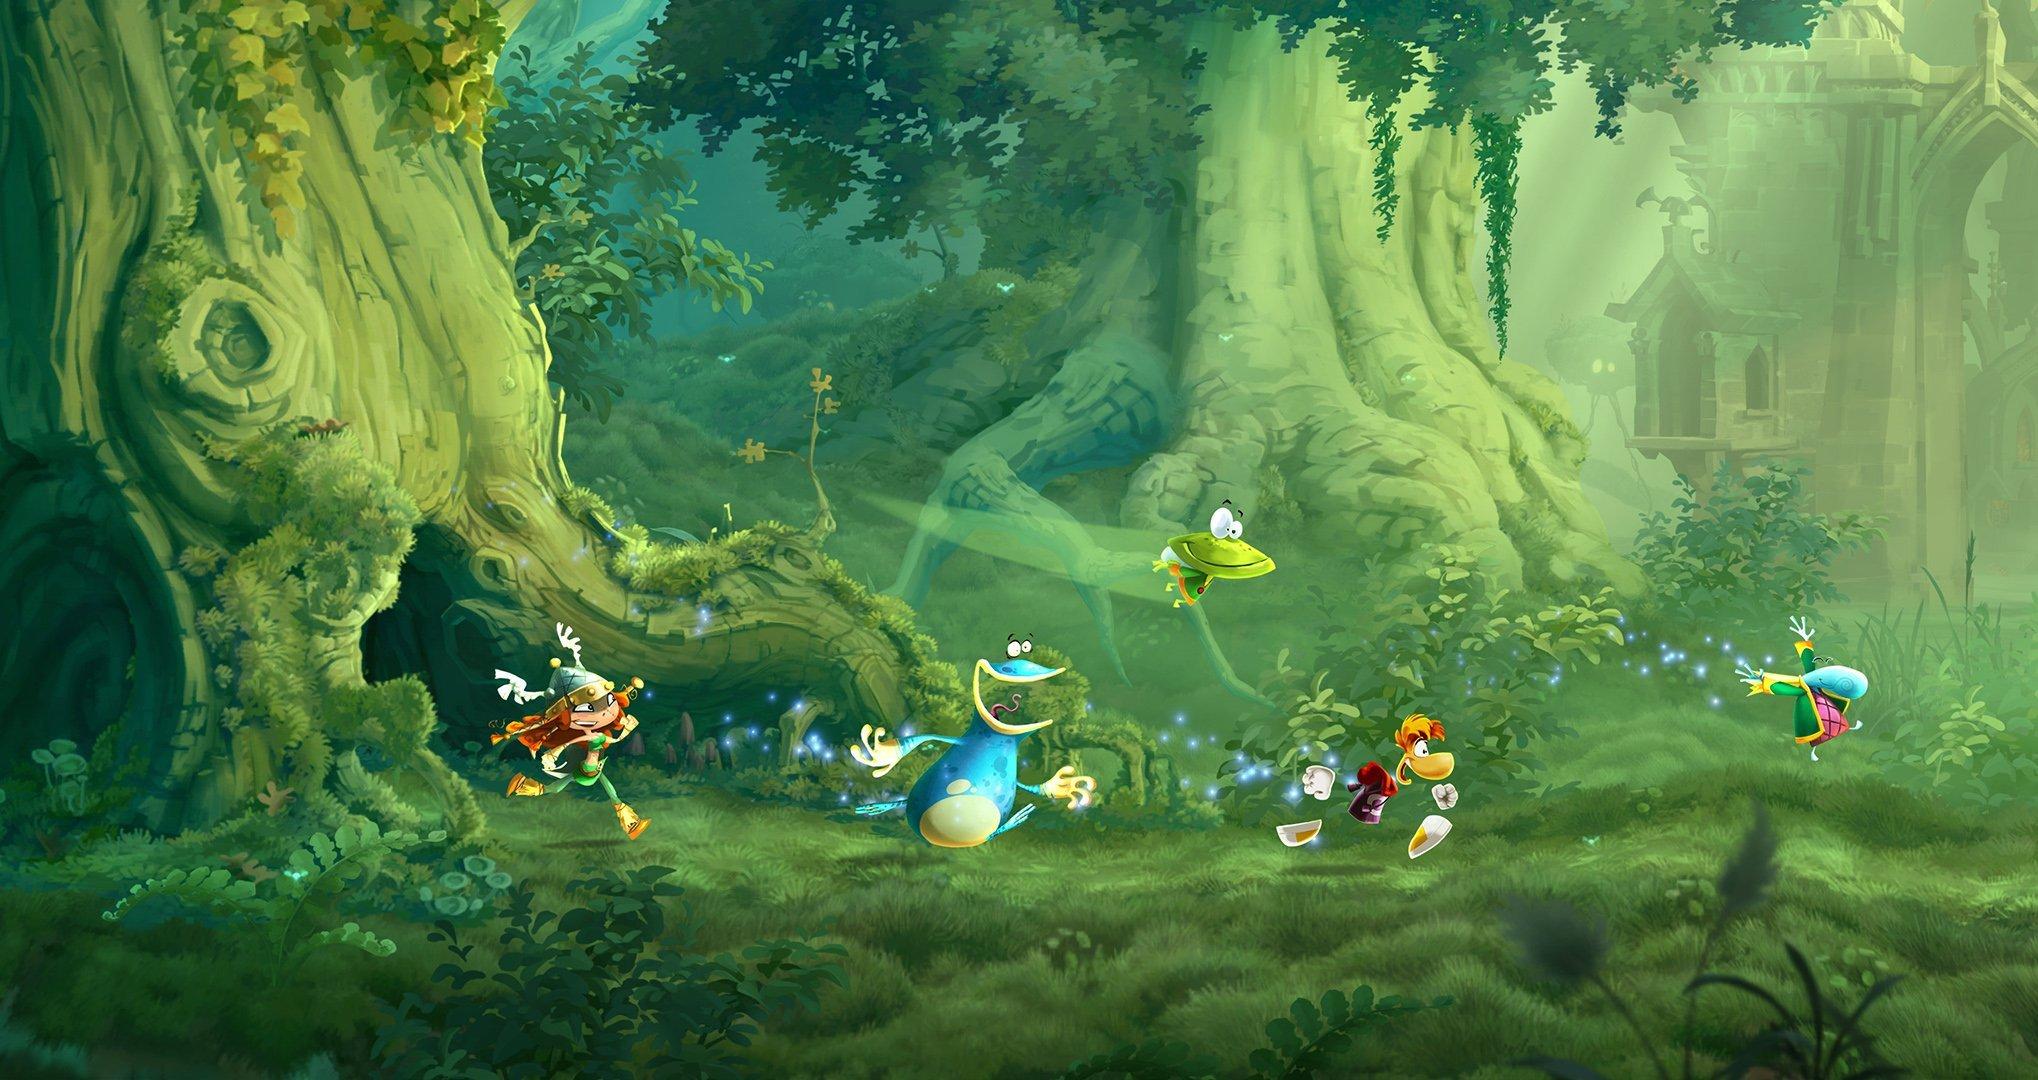 Rayman Legends: Definitive Edition at the best price